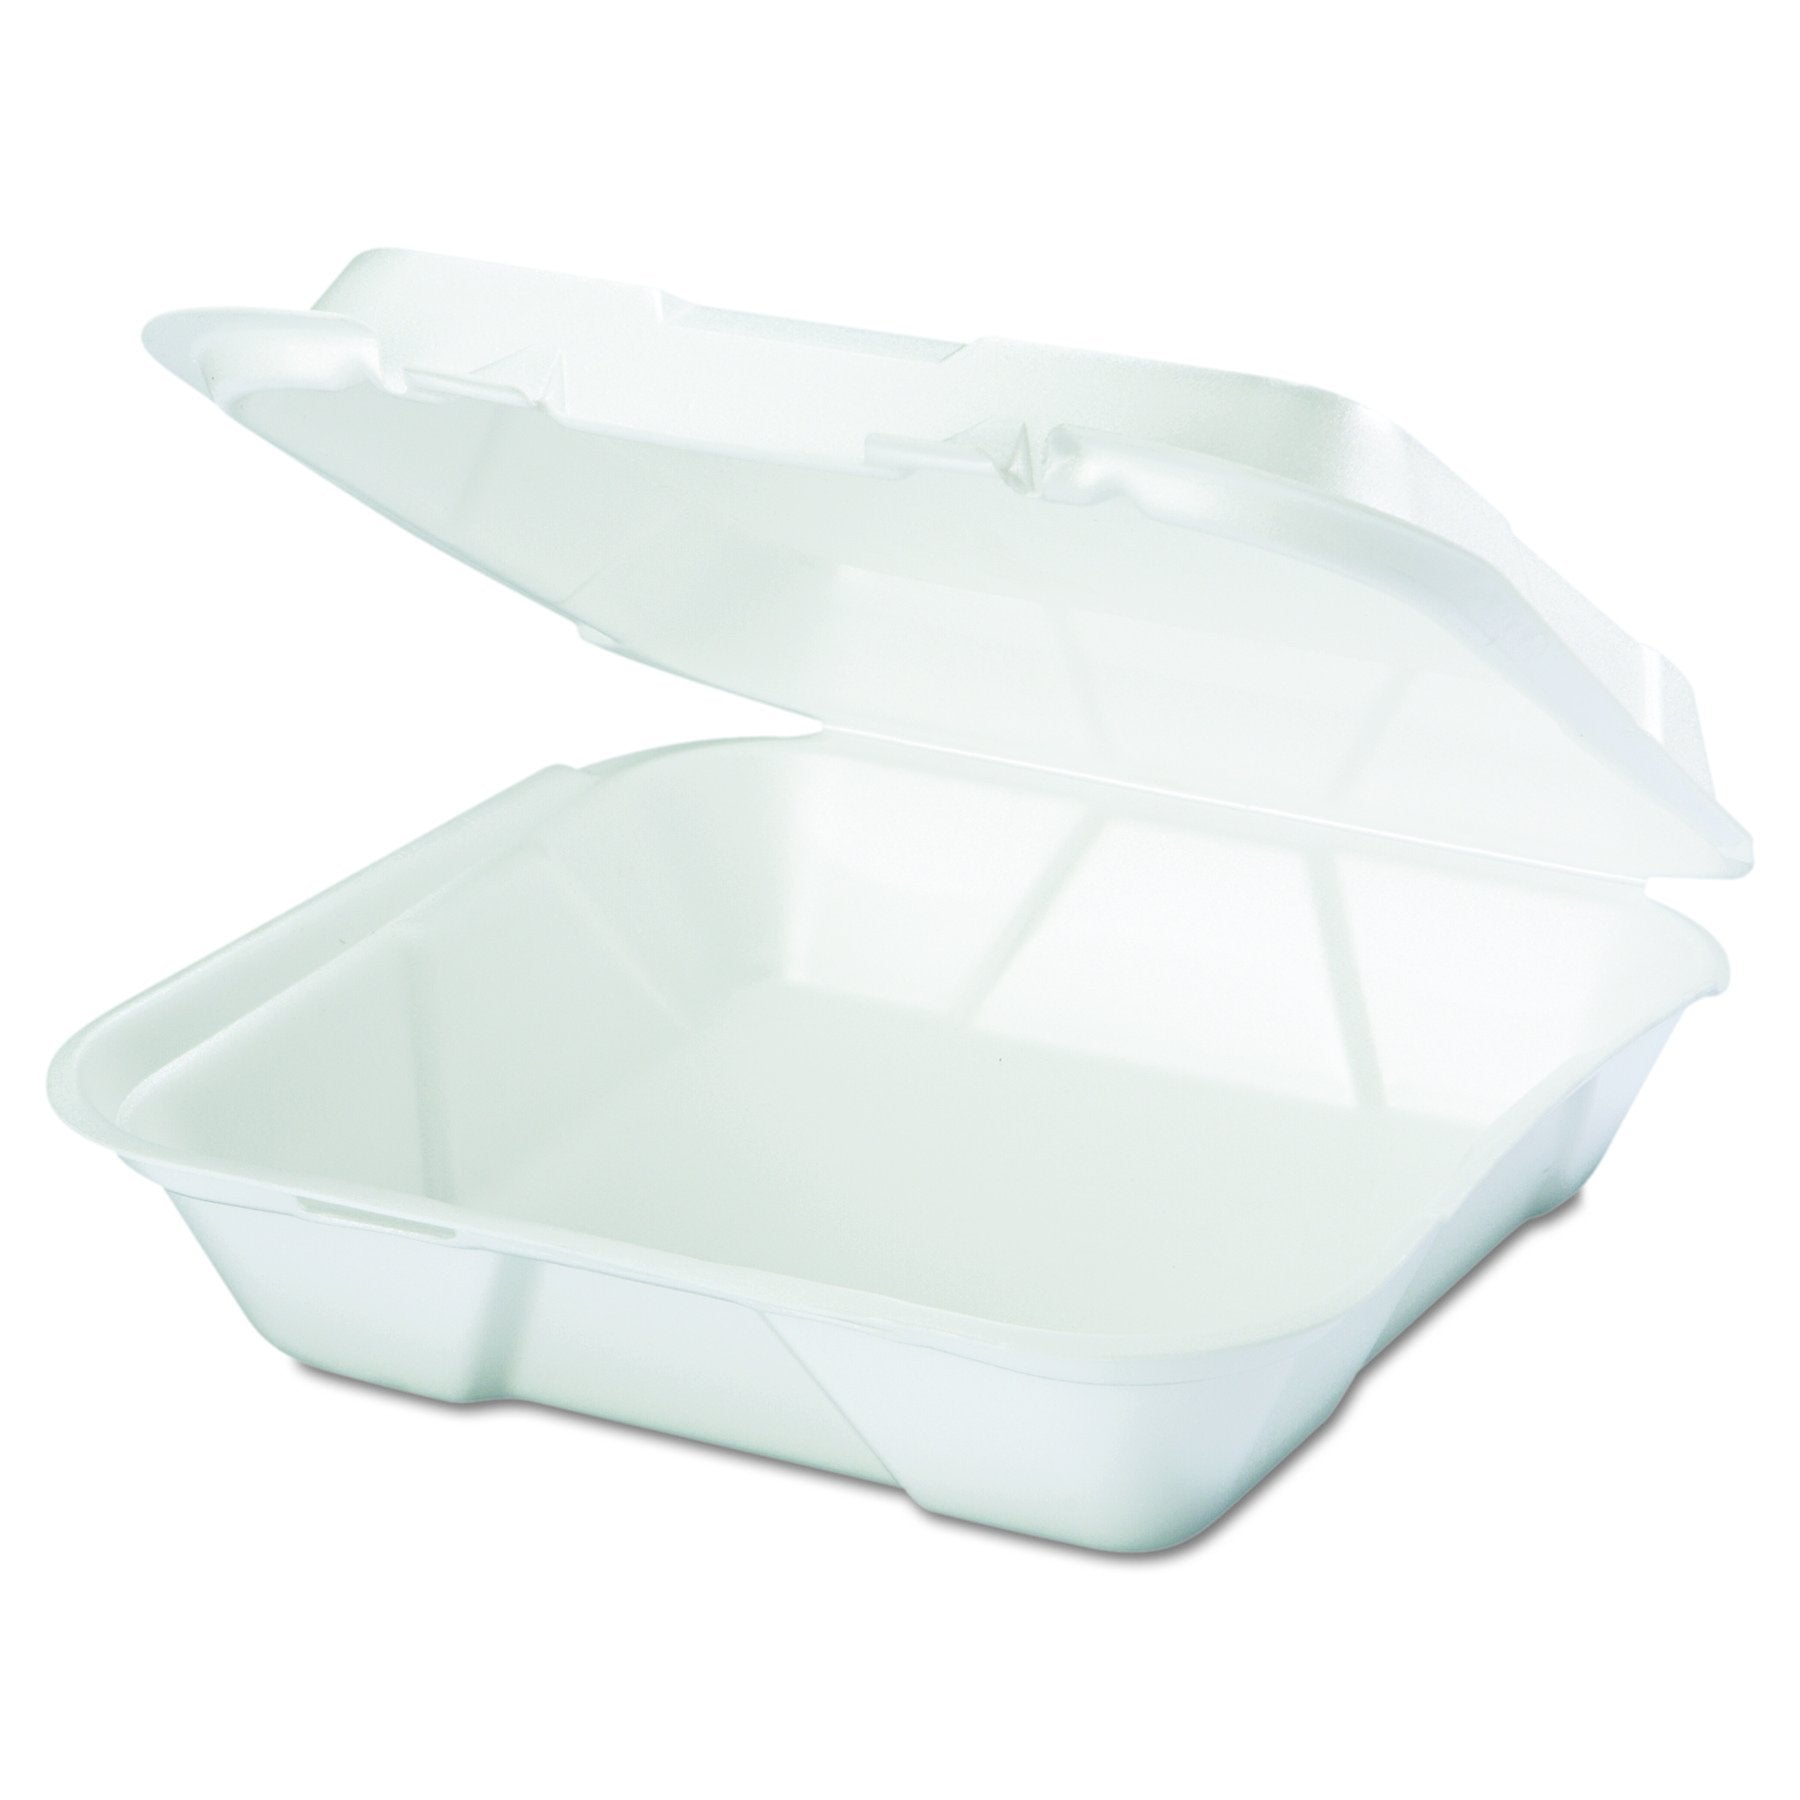 TAKE-OUT/ Container Medium, 1 Comp, White 200/cs-Food Service – Croaker, Inc